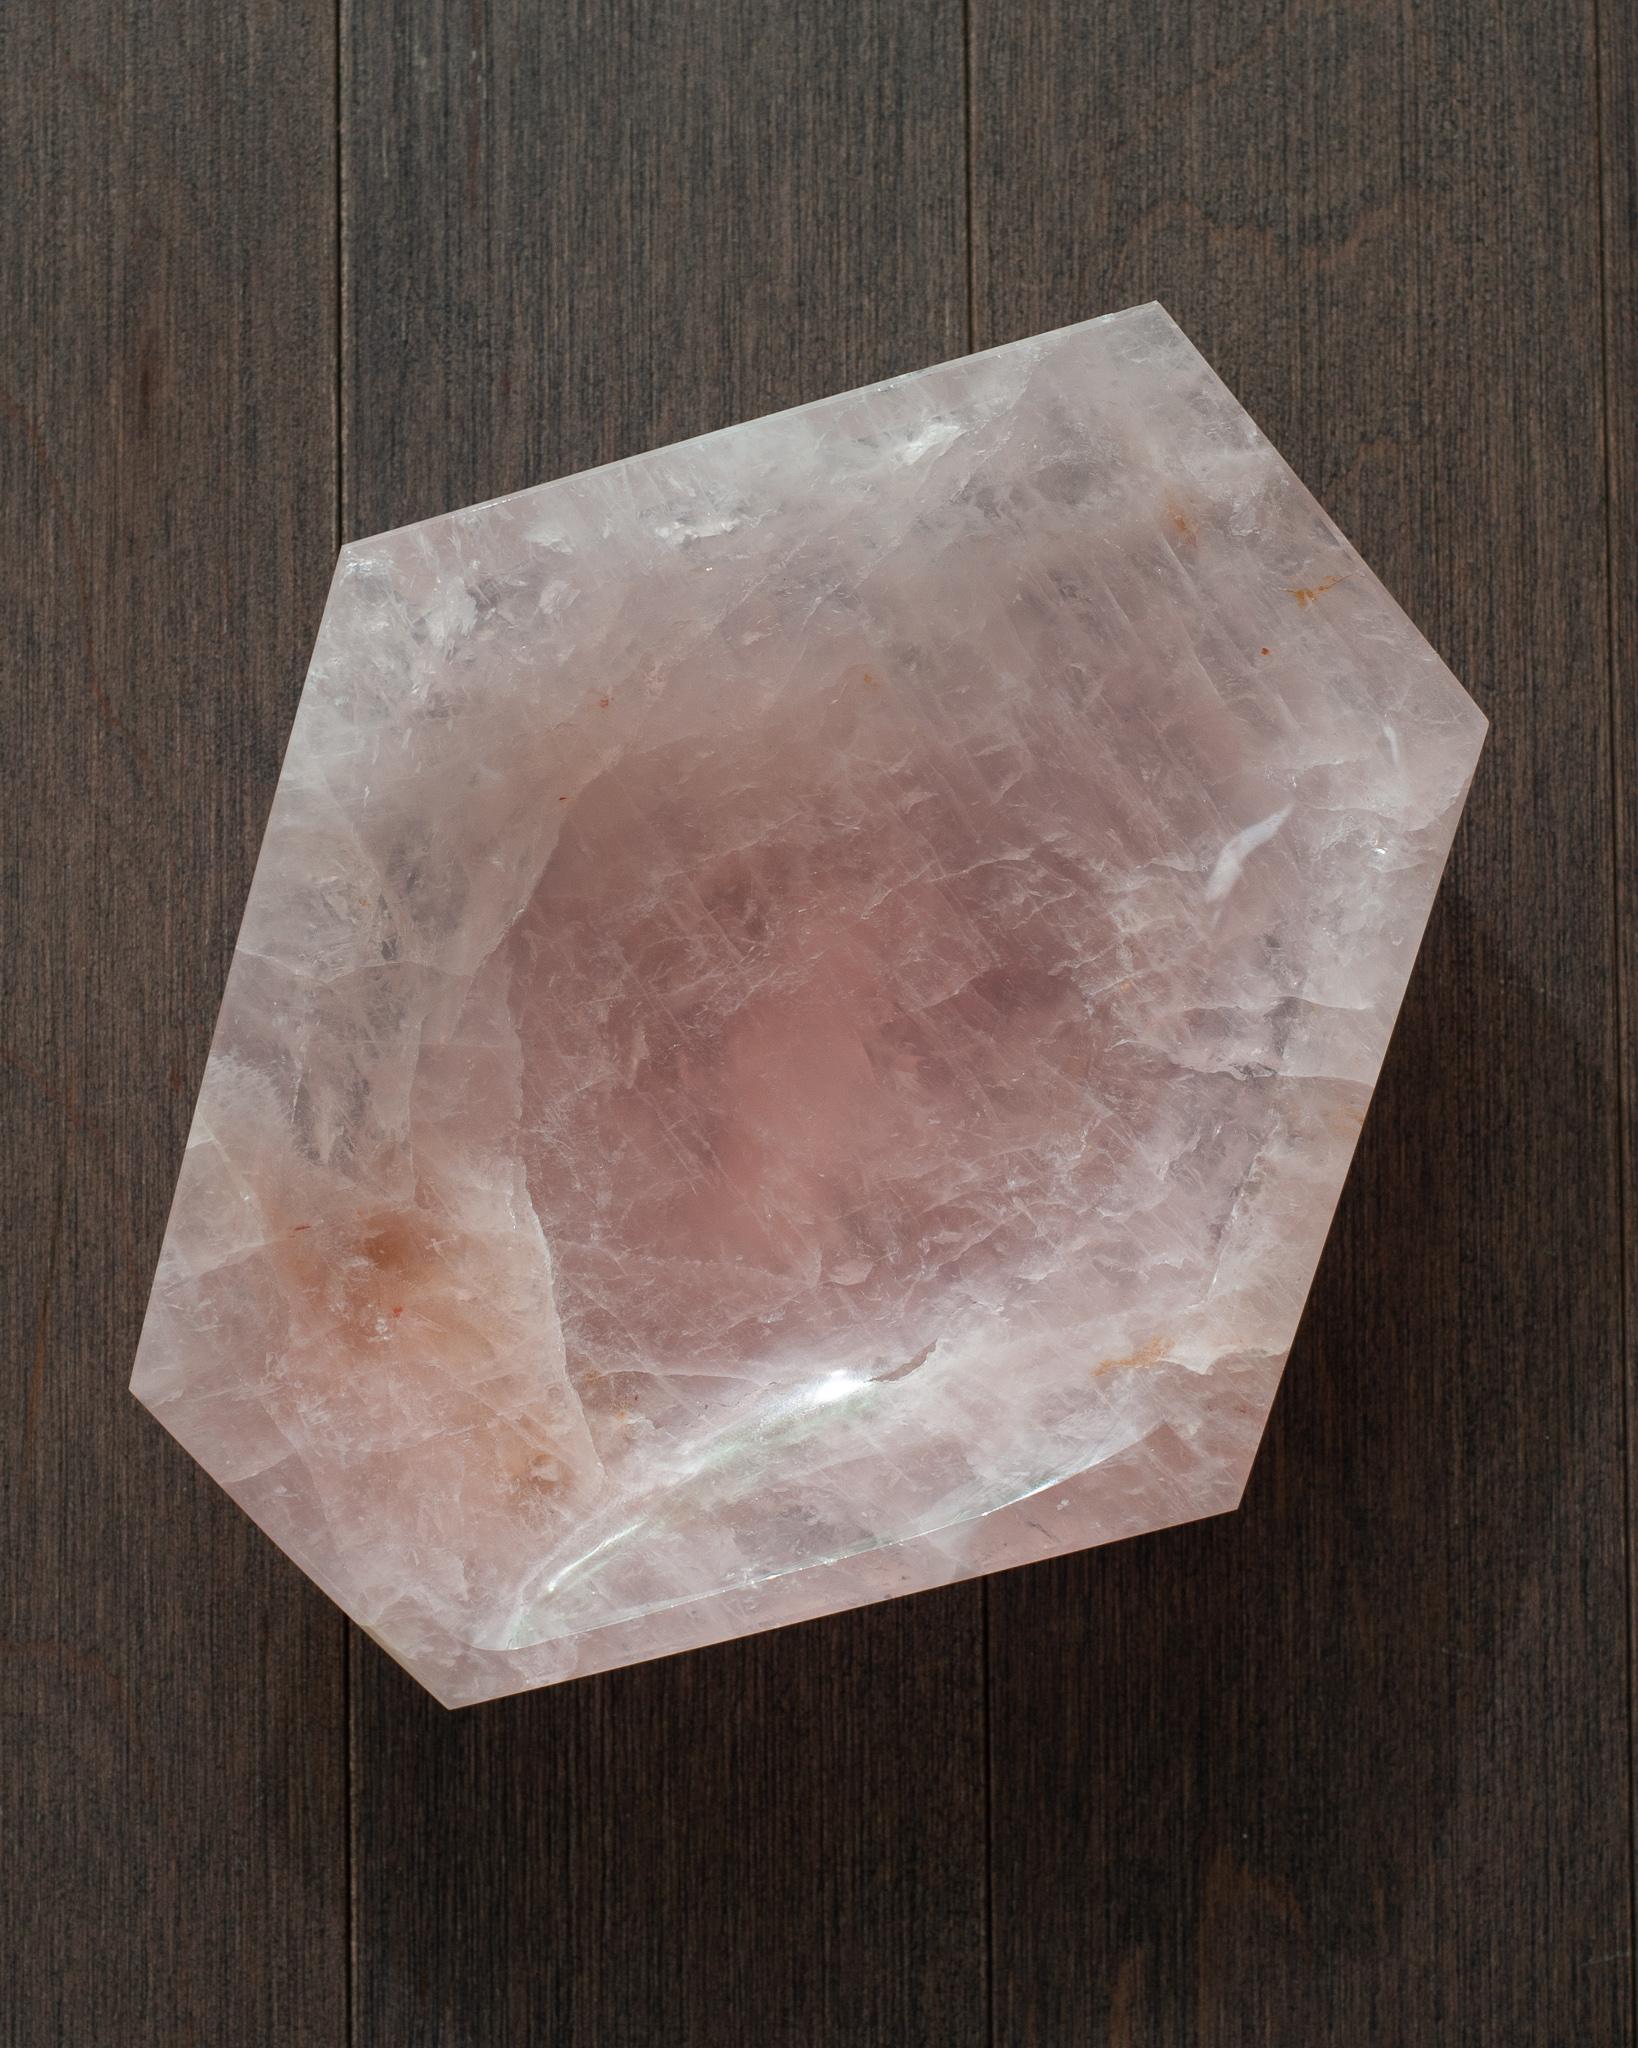 A stunning contemporary vibrant pink rose quartz bowl with angular faceted shape. Invite the healing energy of rose quartz into your interior with a beautiful and functional bowl. This piece is cut like a gemstone and is a saturated shade of pink.